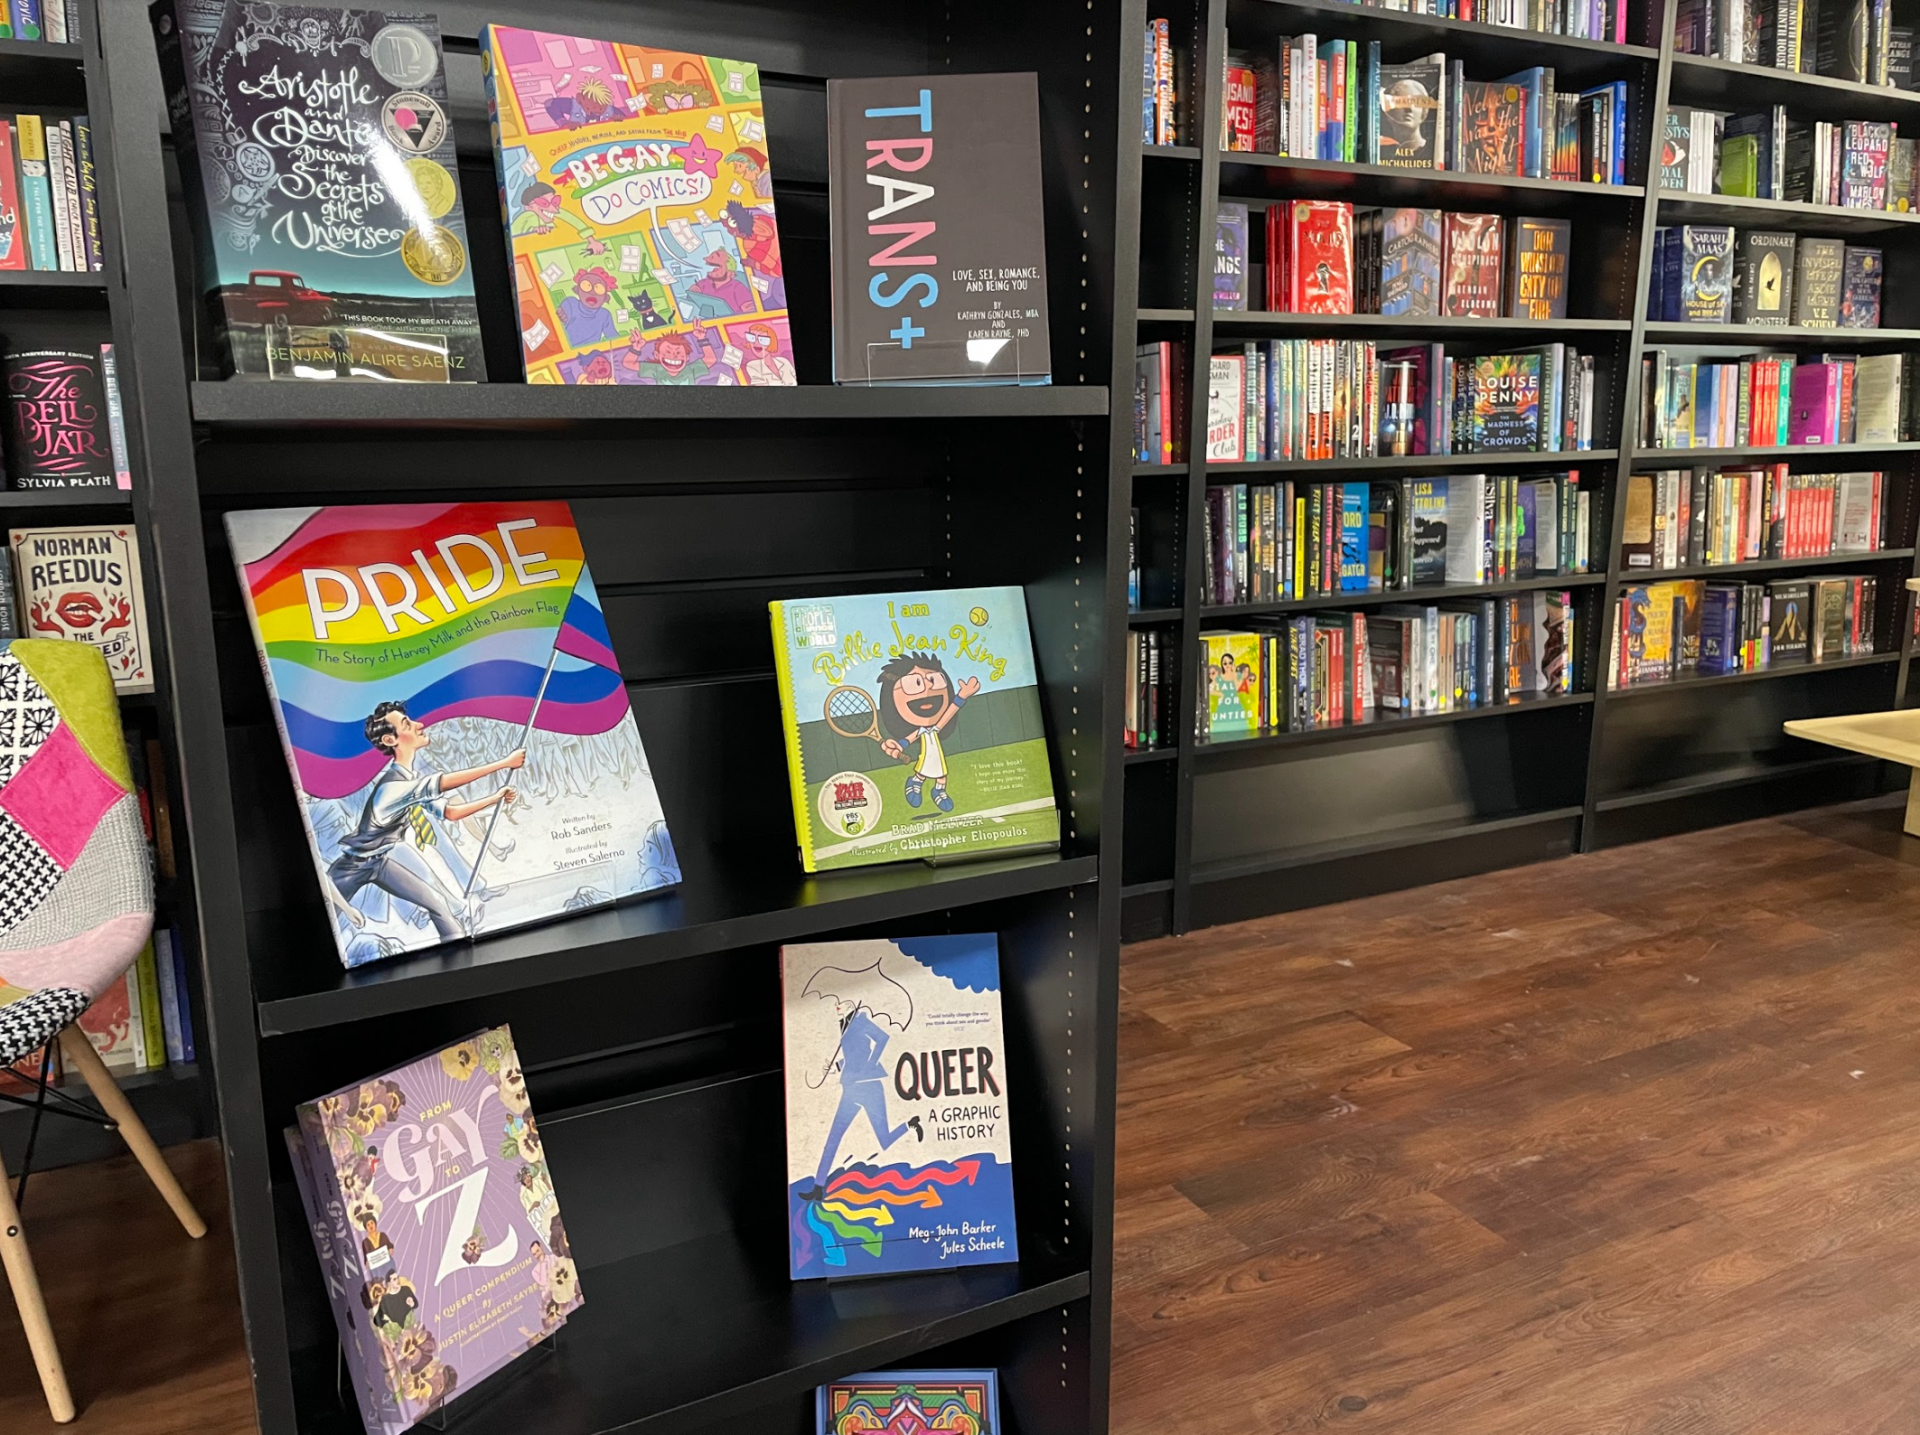 Books highlighting Pride and the LGBTQ+ community are displayed in a new bookstore, Parthenon Books.